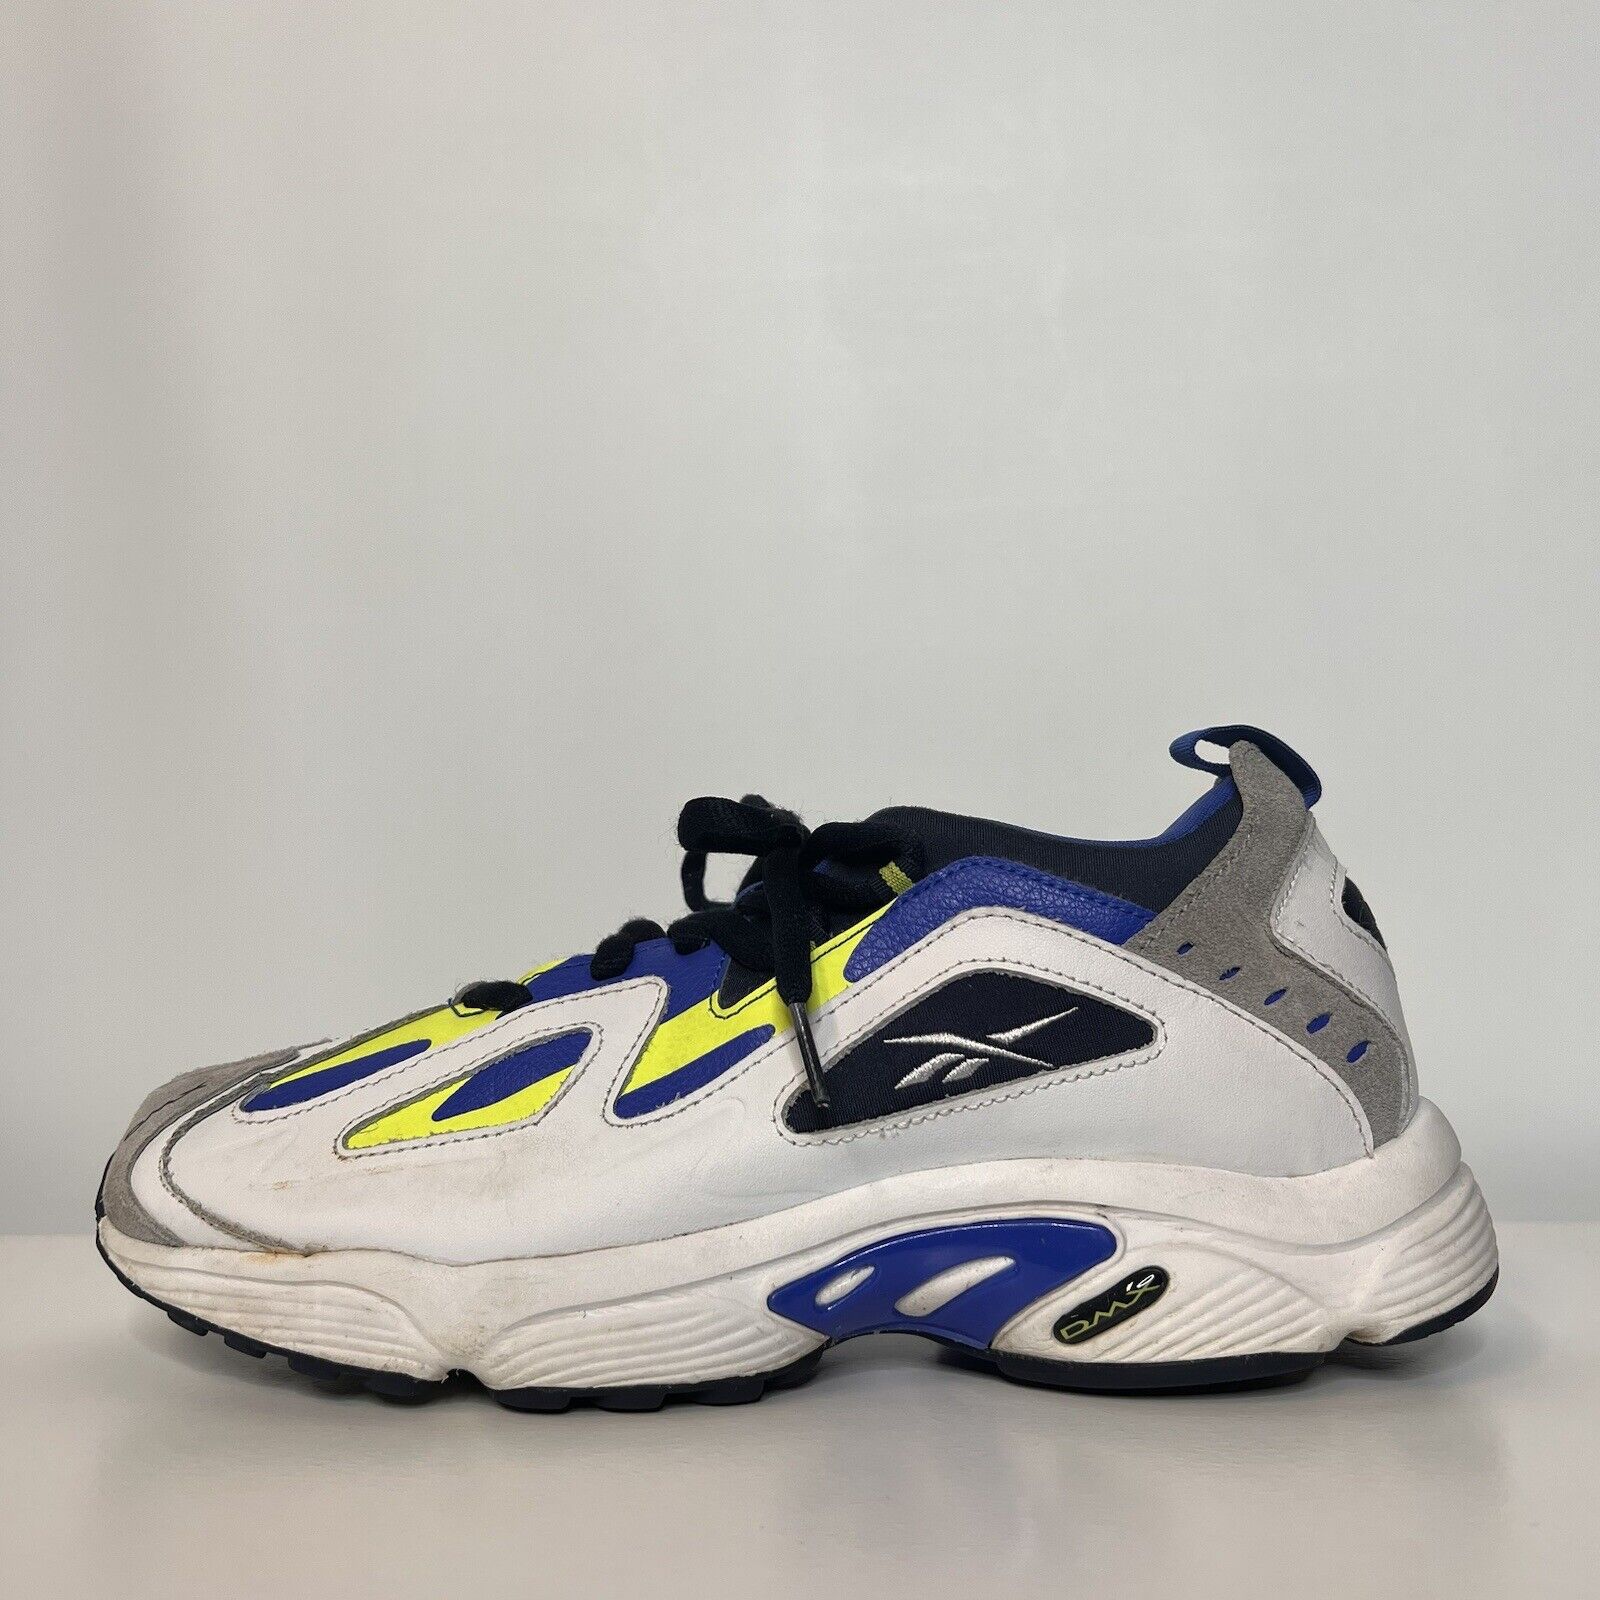 Reebok DMX 1200 CN7119 Athletic Low Running Shoes White Blue Mens US Size  9.5